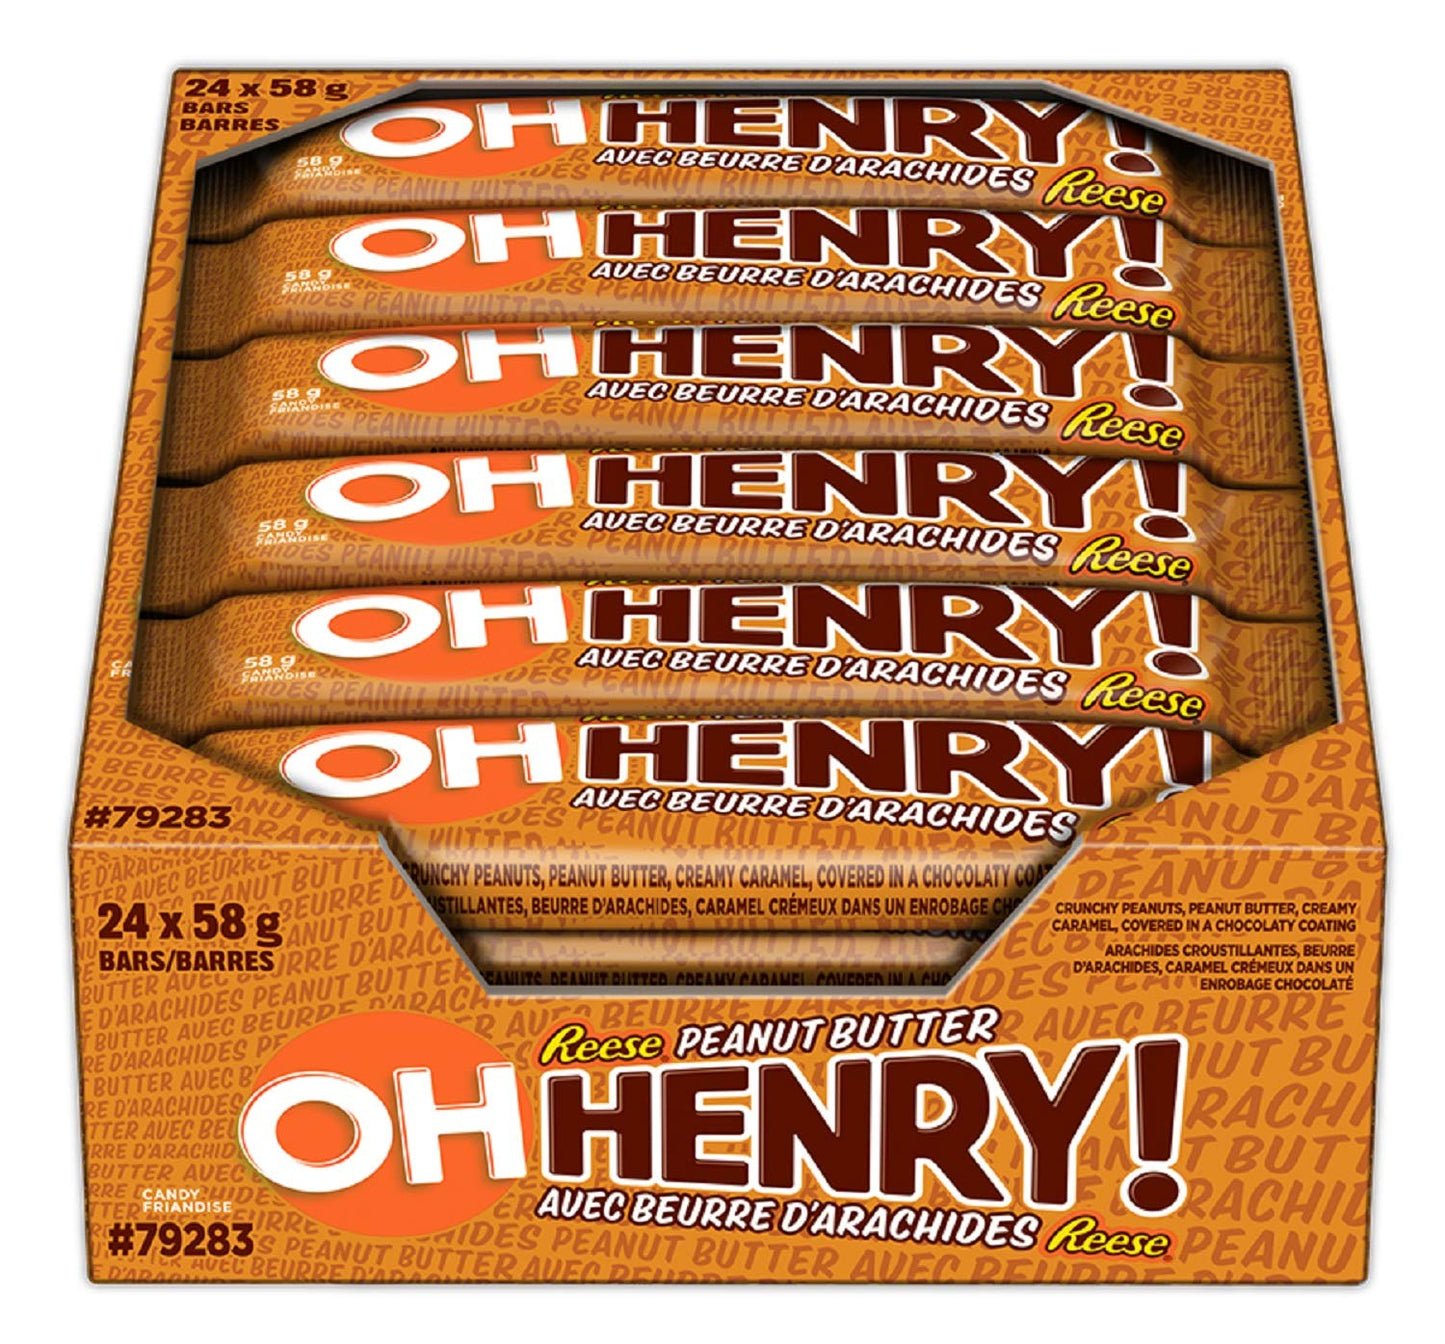 OH HENRY! Reese Peanut Butter Chocolate Candy Bars Multipack, 24 X 58g, 1.3kg/45.8oz (Shipped from Canada)